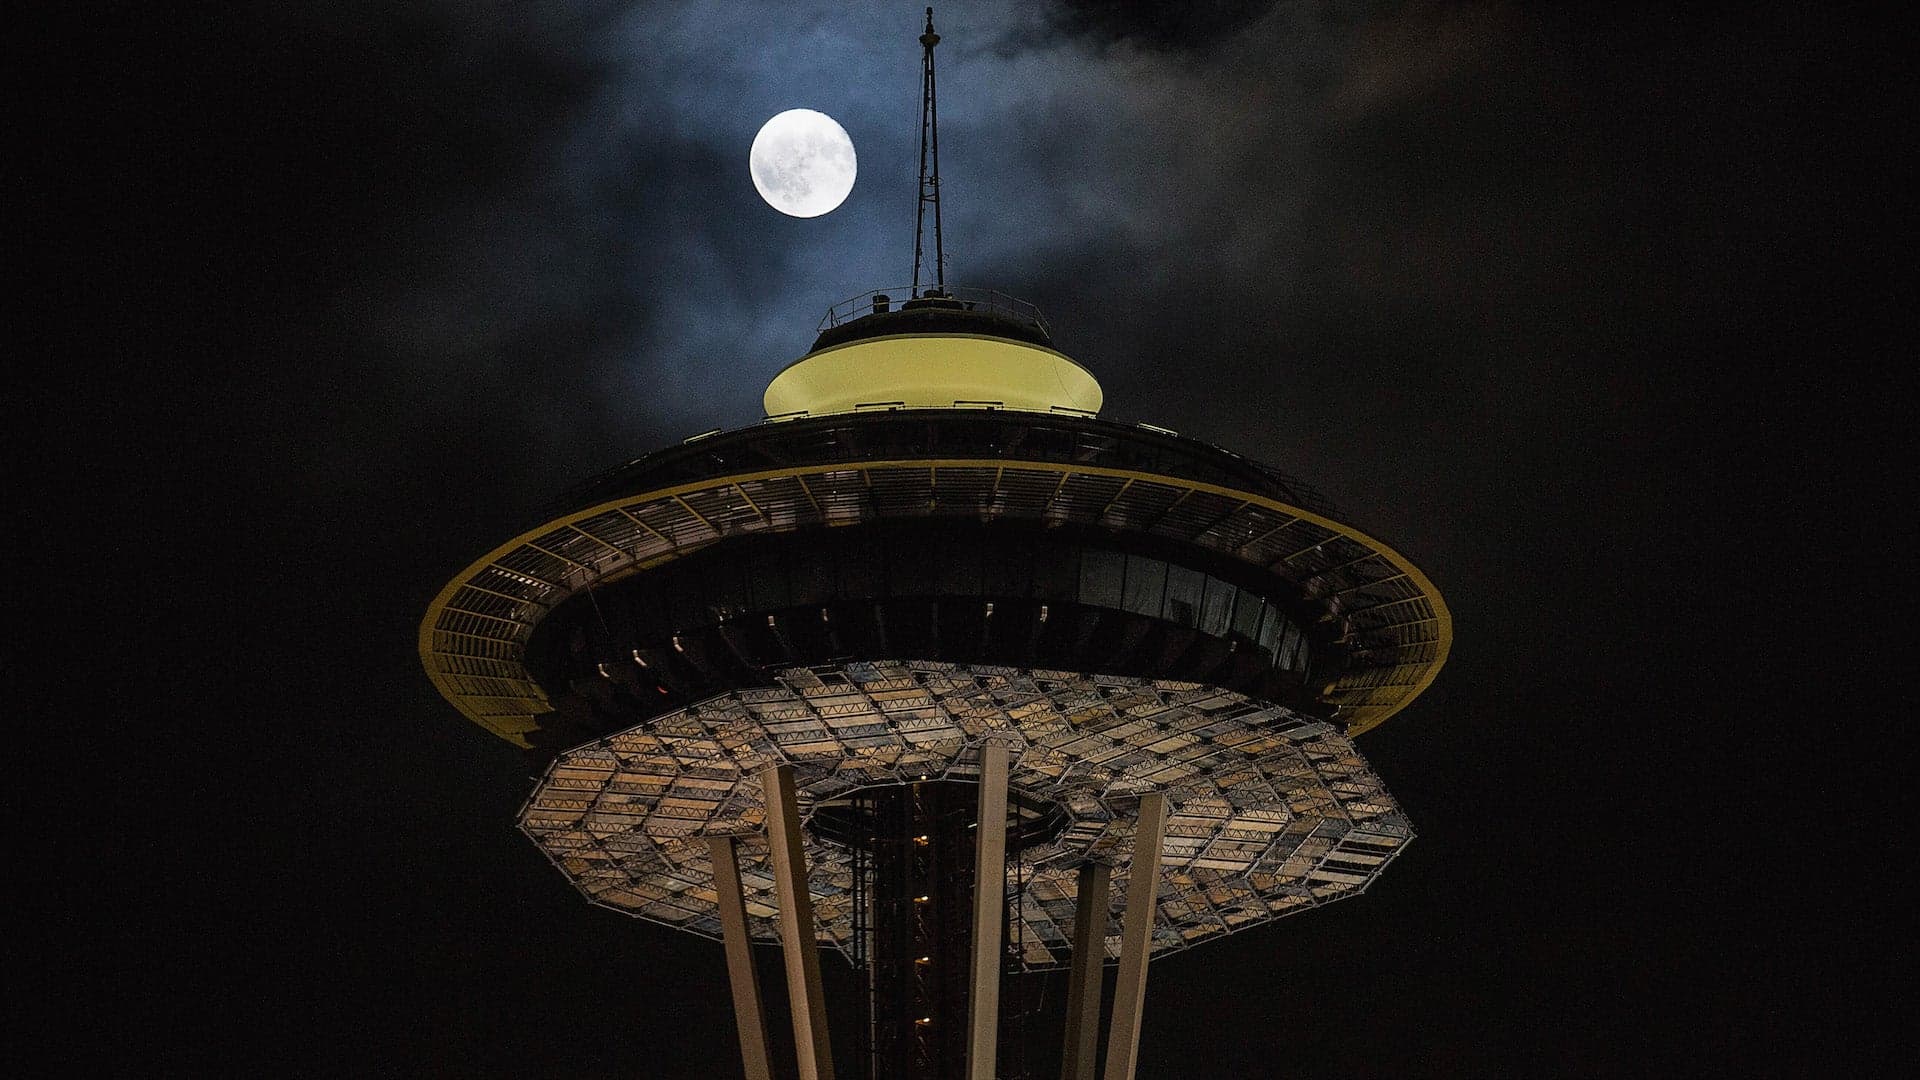 Seattle Man Crashed UAV Into Space Needle, Ordered to Forfeit Drone and Pay Fine